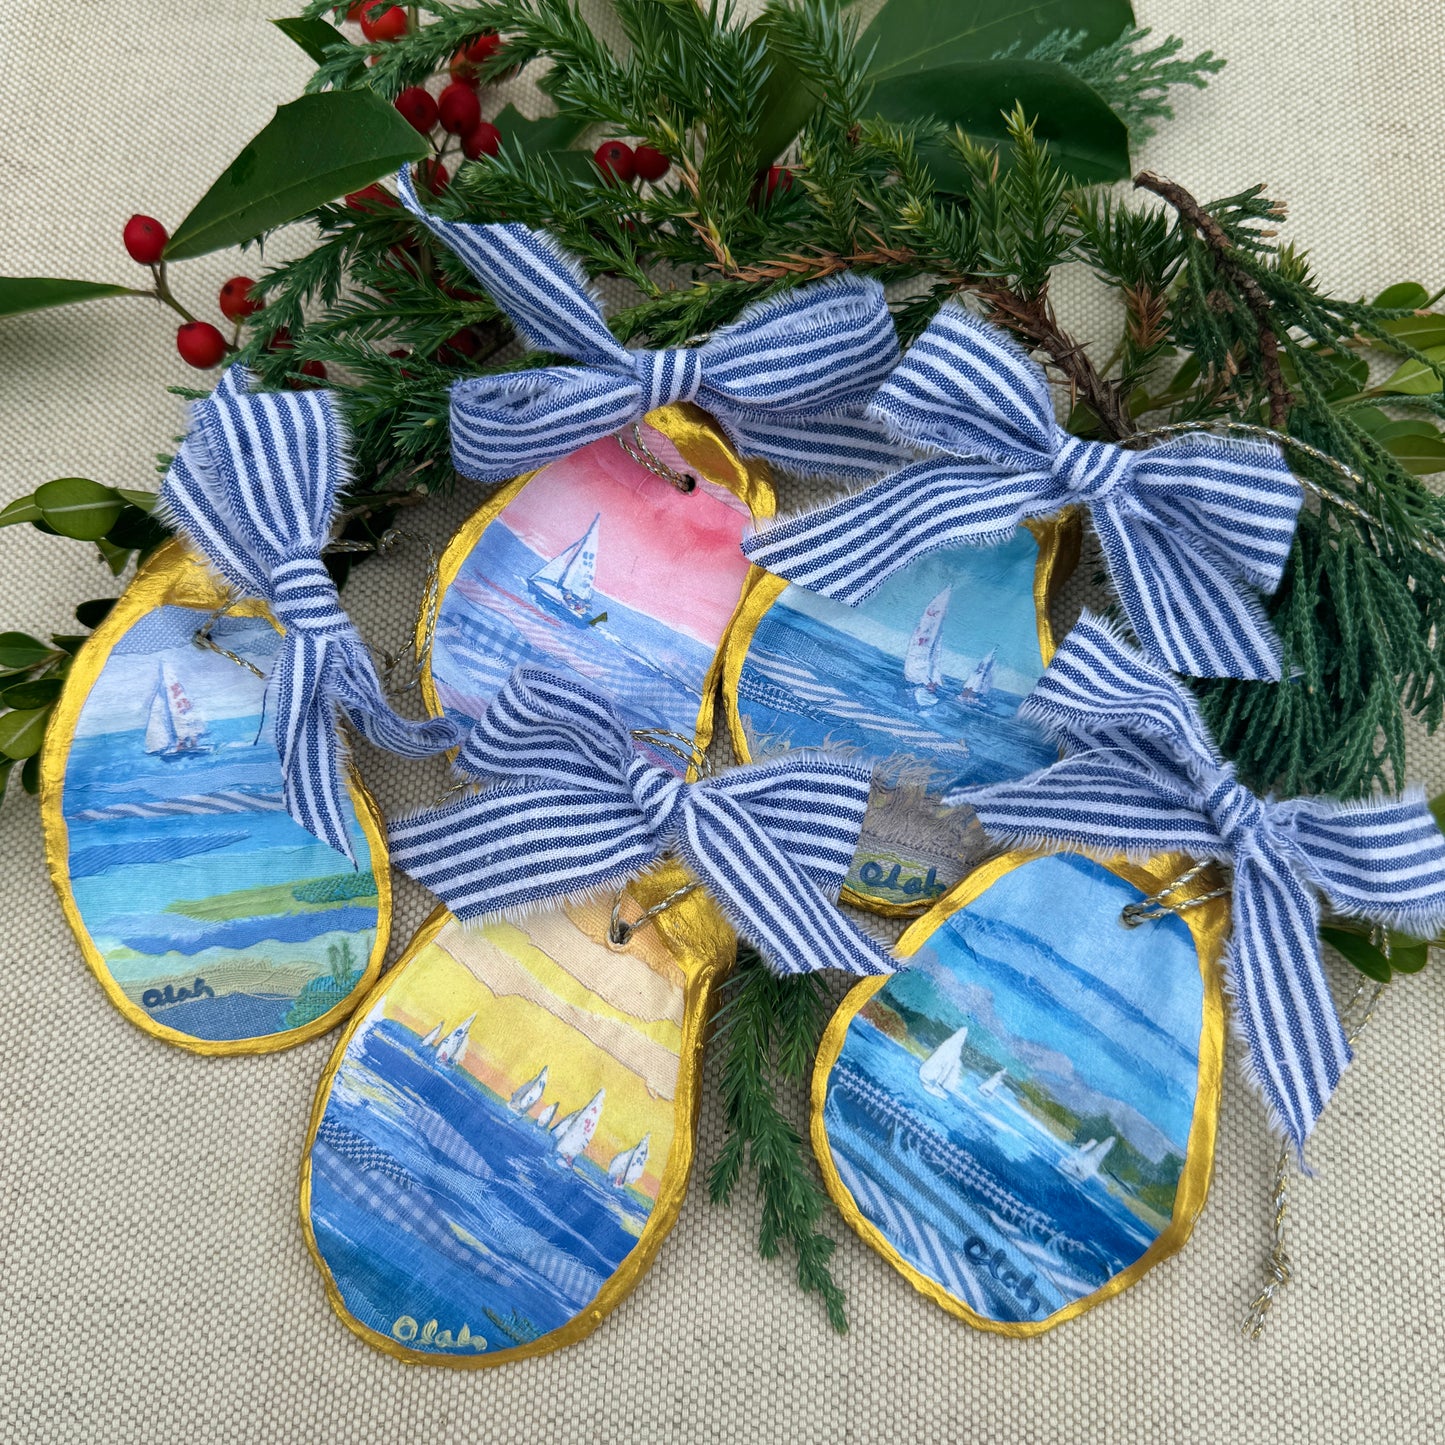 Oyster Ornaments with art by Karin Olah